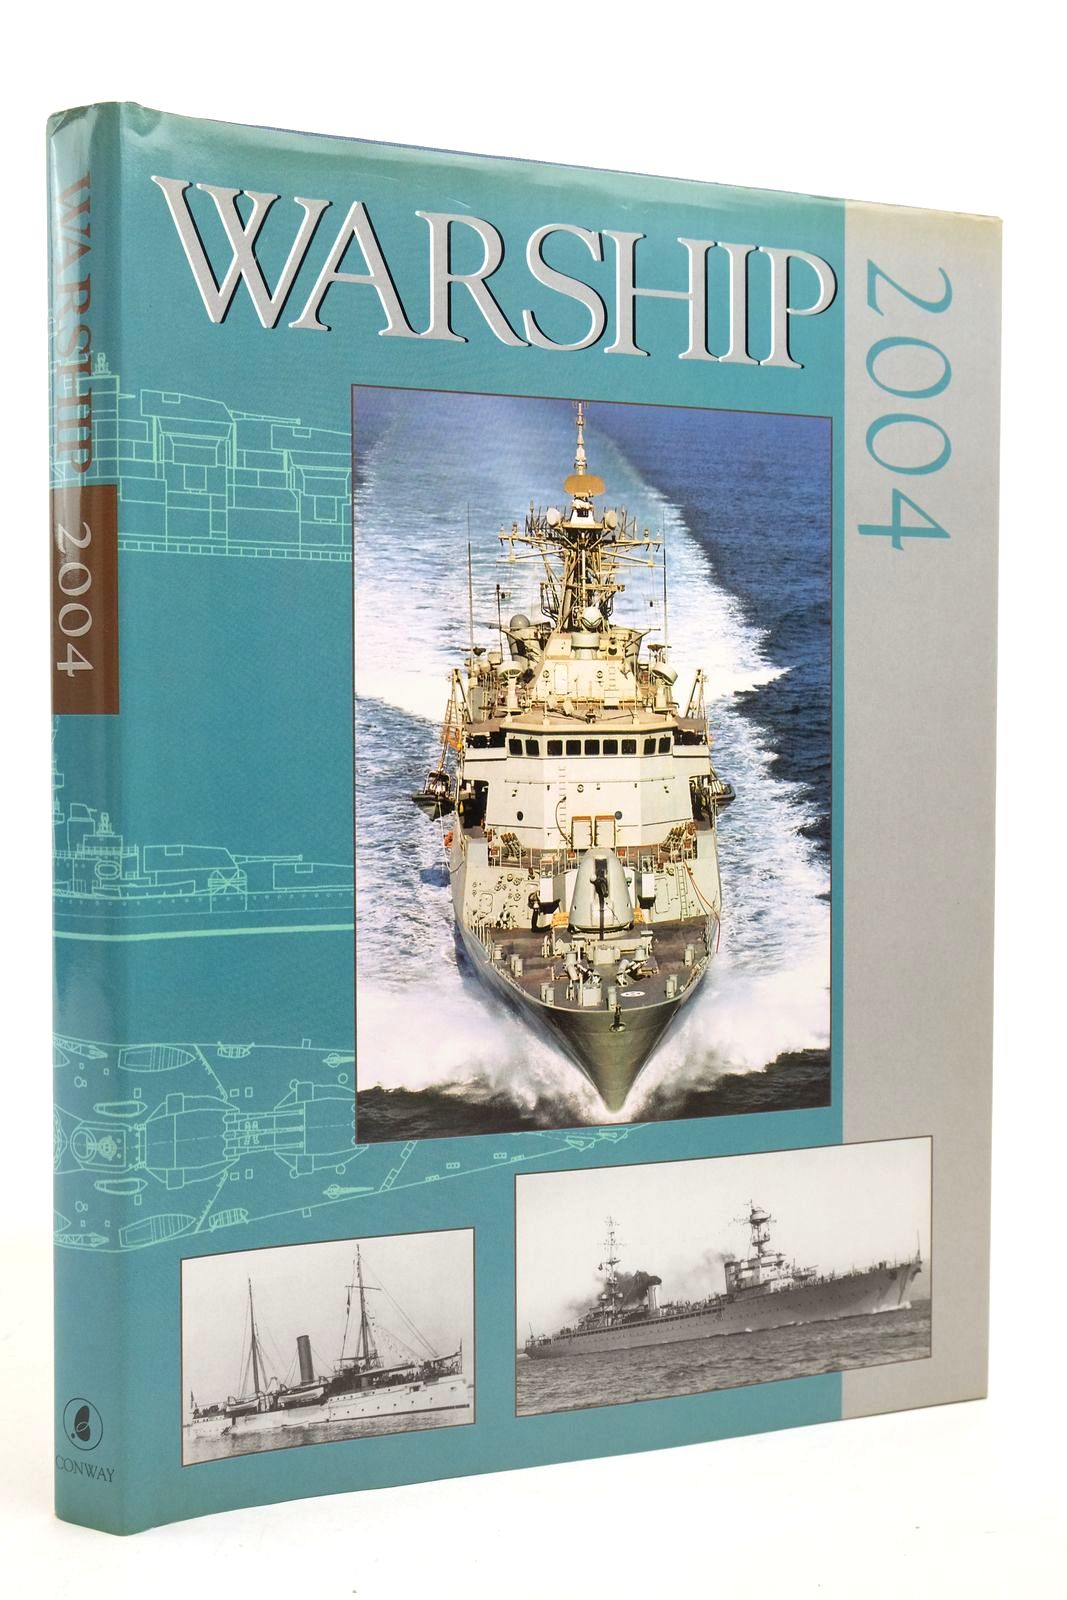 Photo of WARSHIP 2004 written by Preston, Antony Robson, Martin Dent, Stephen published by Conway Maritime Press (STOCK CODE: 2139852)  for sale by Stella & Rose's Books